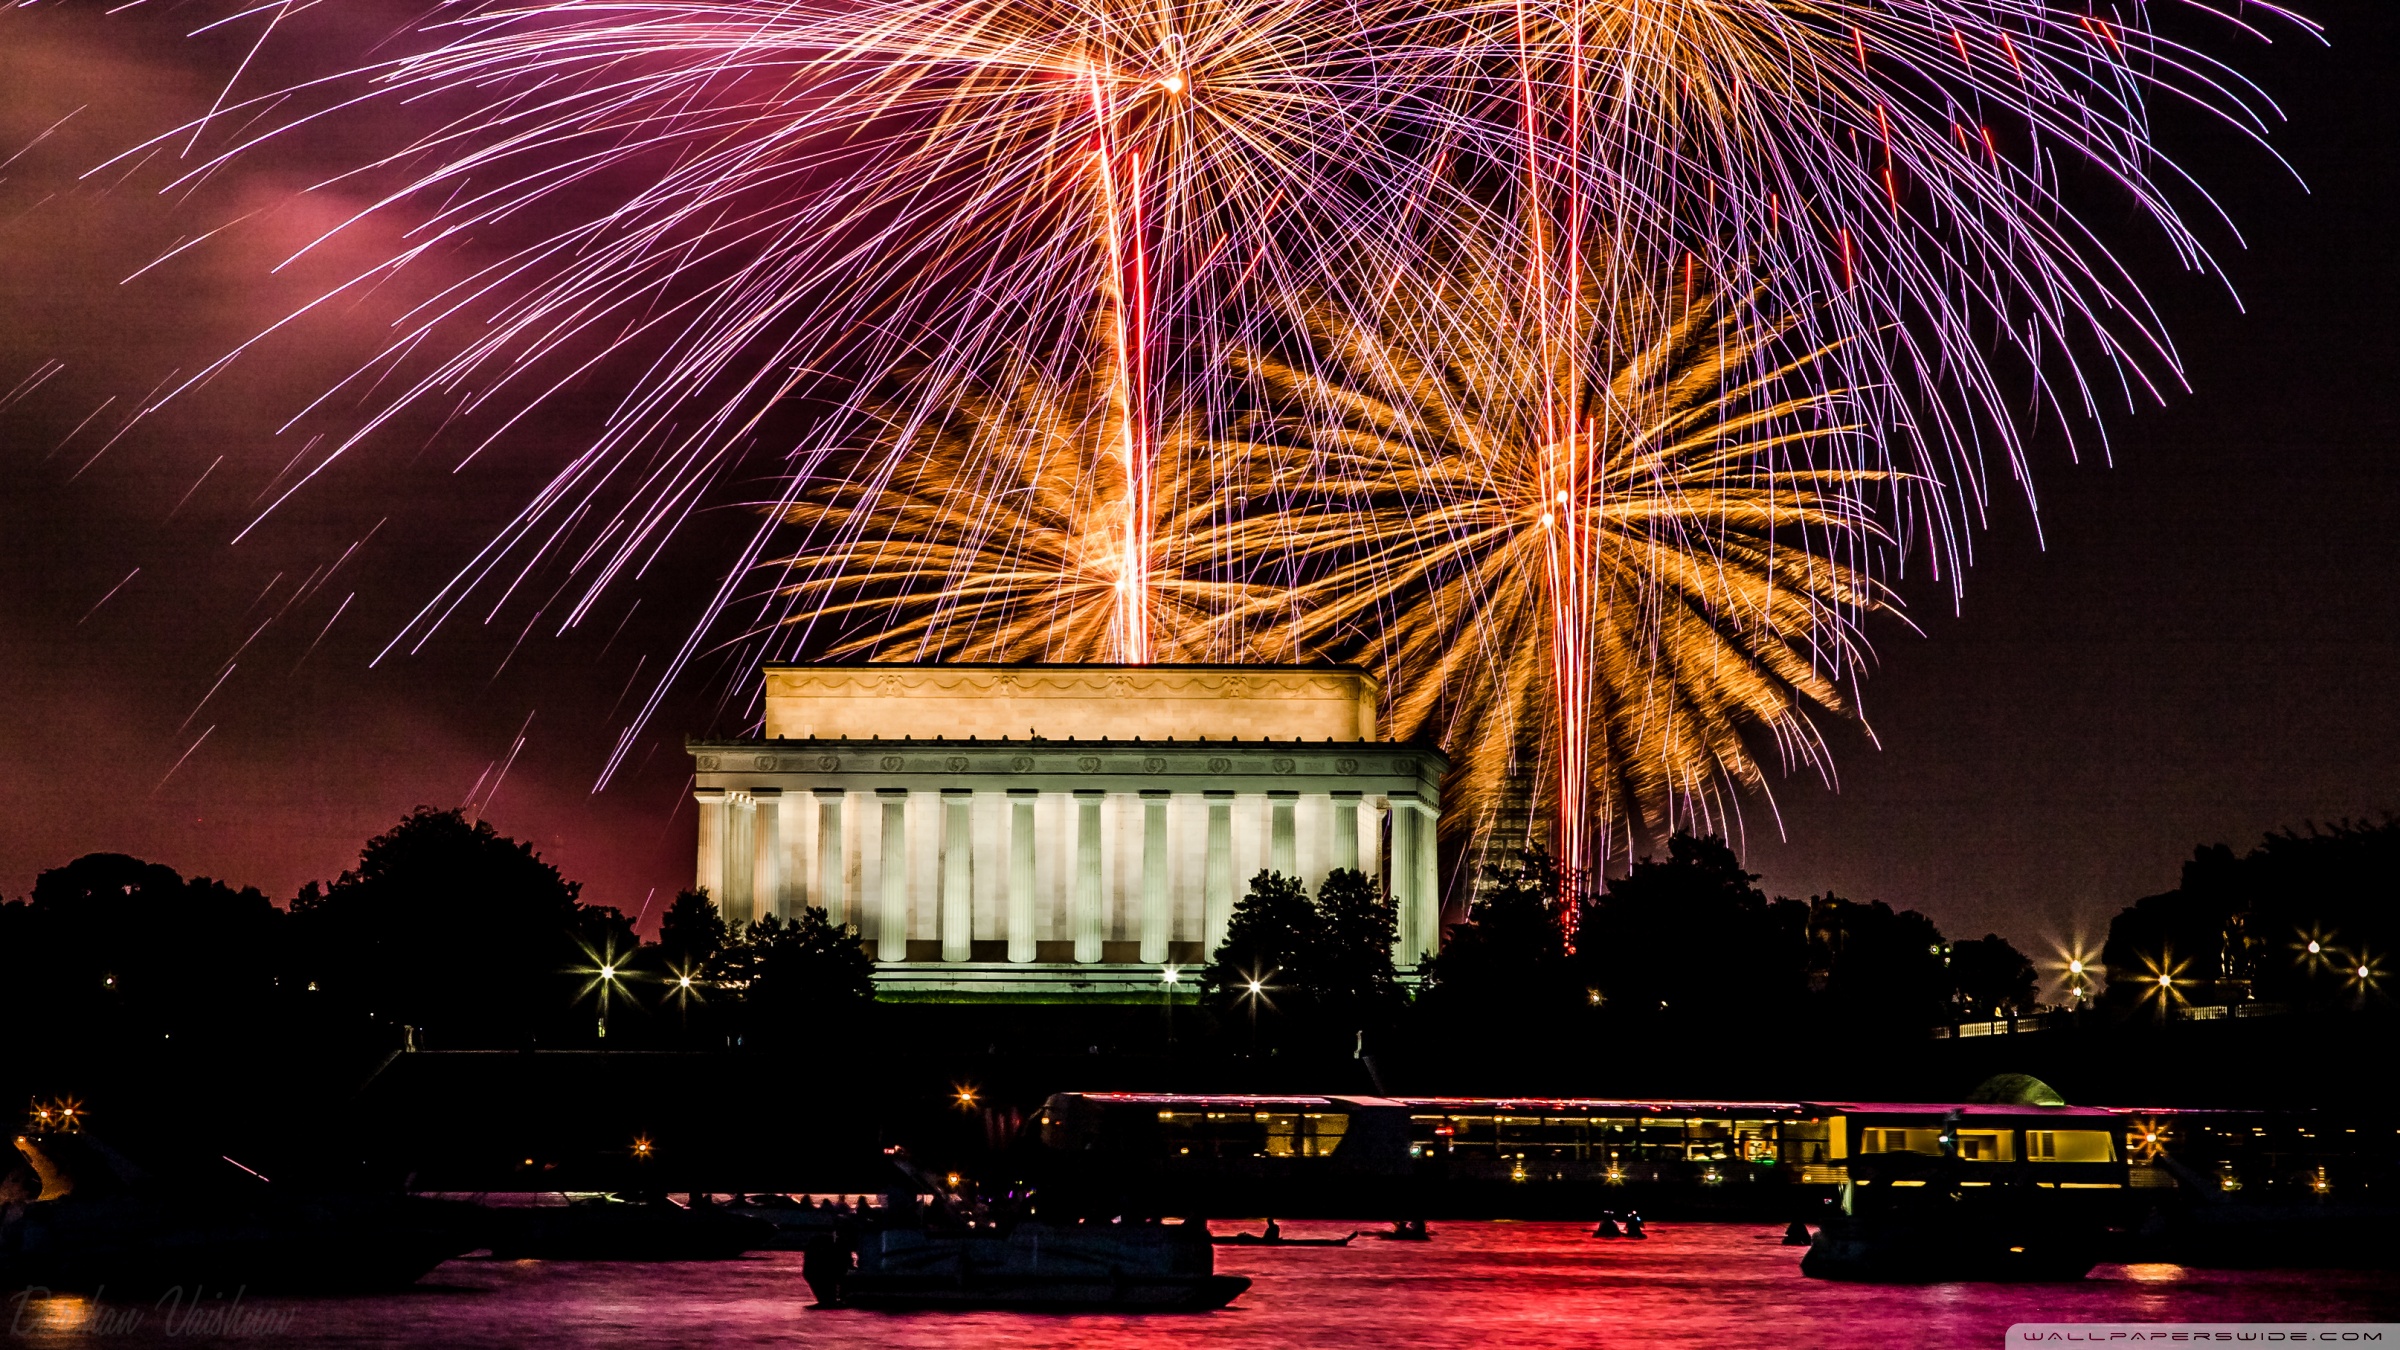 4 of july wallpaper,fireworks,landmark,night,new years day,event